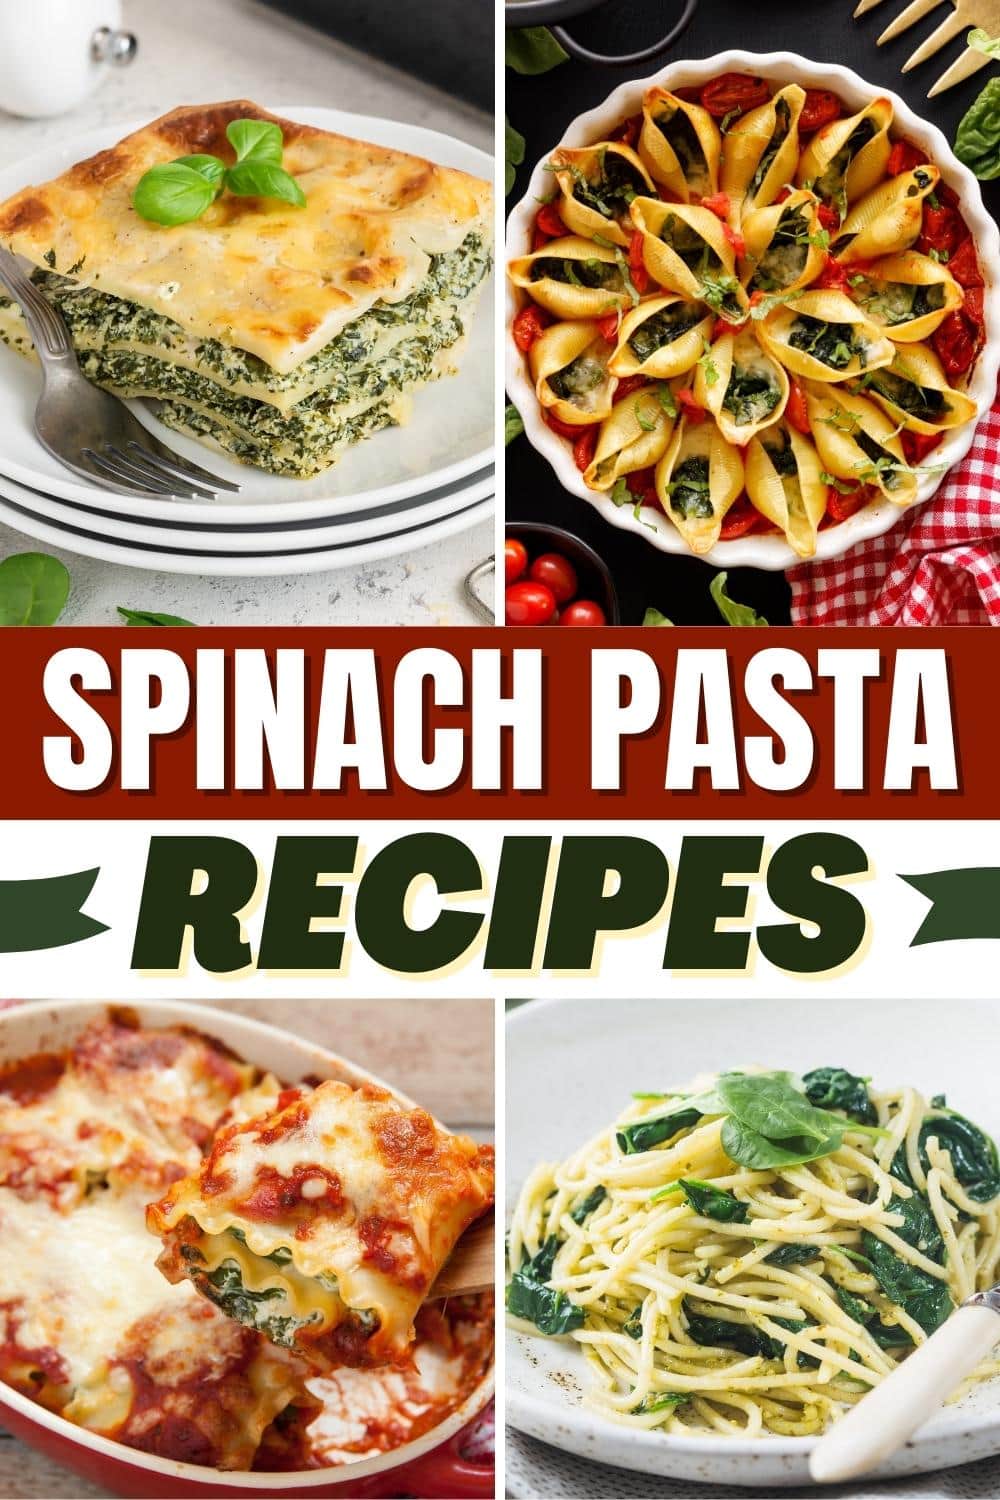 15 Spinach Pasta Recipes (Easy Dinner Dishes) - Insanely Good